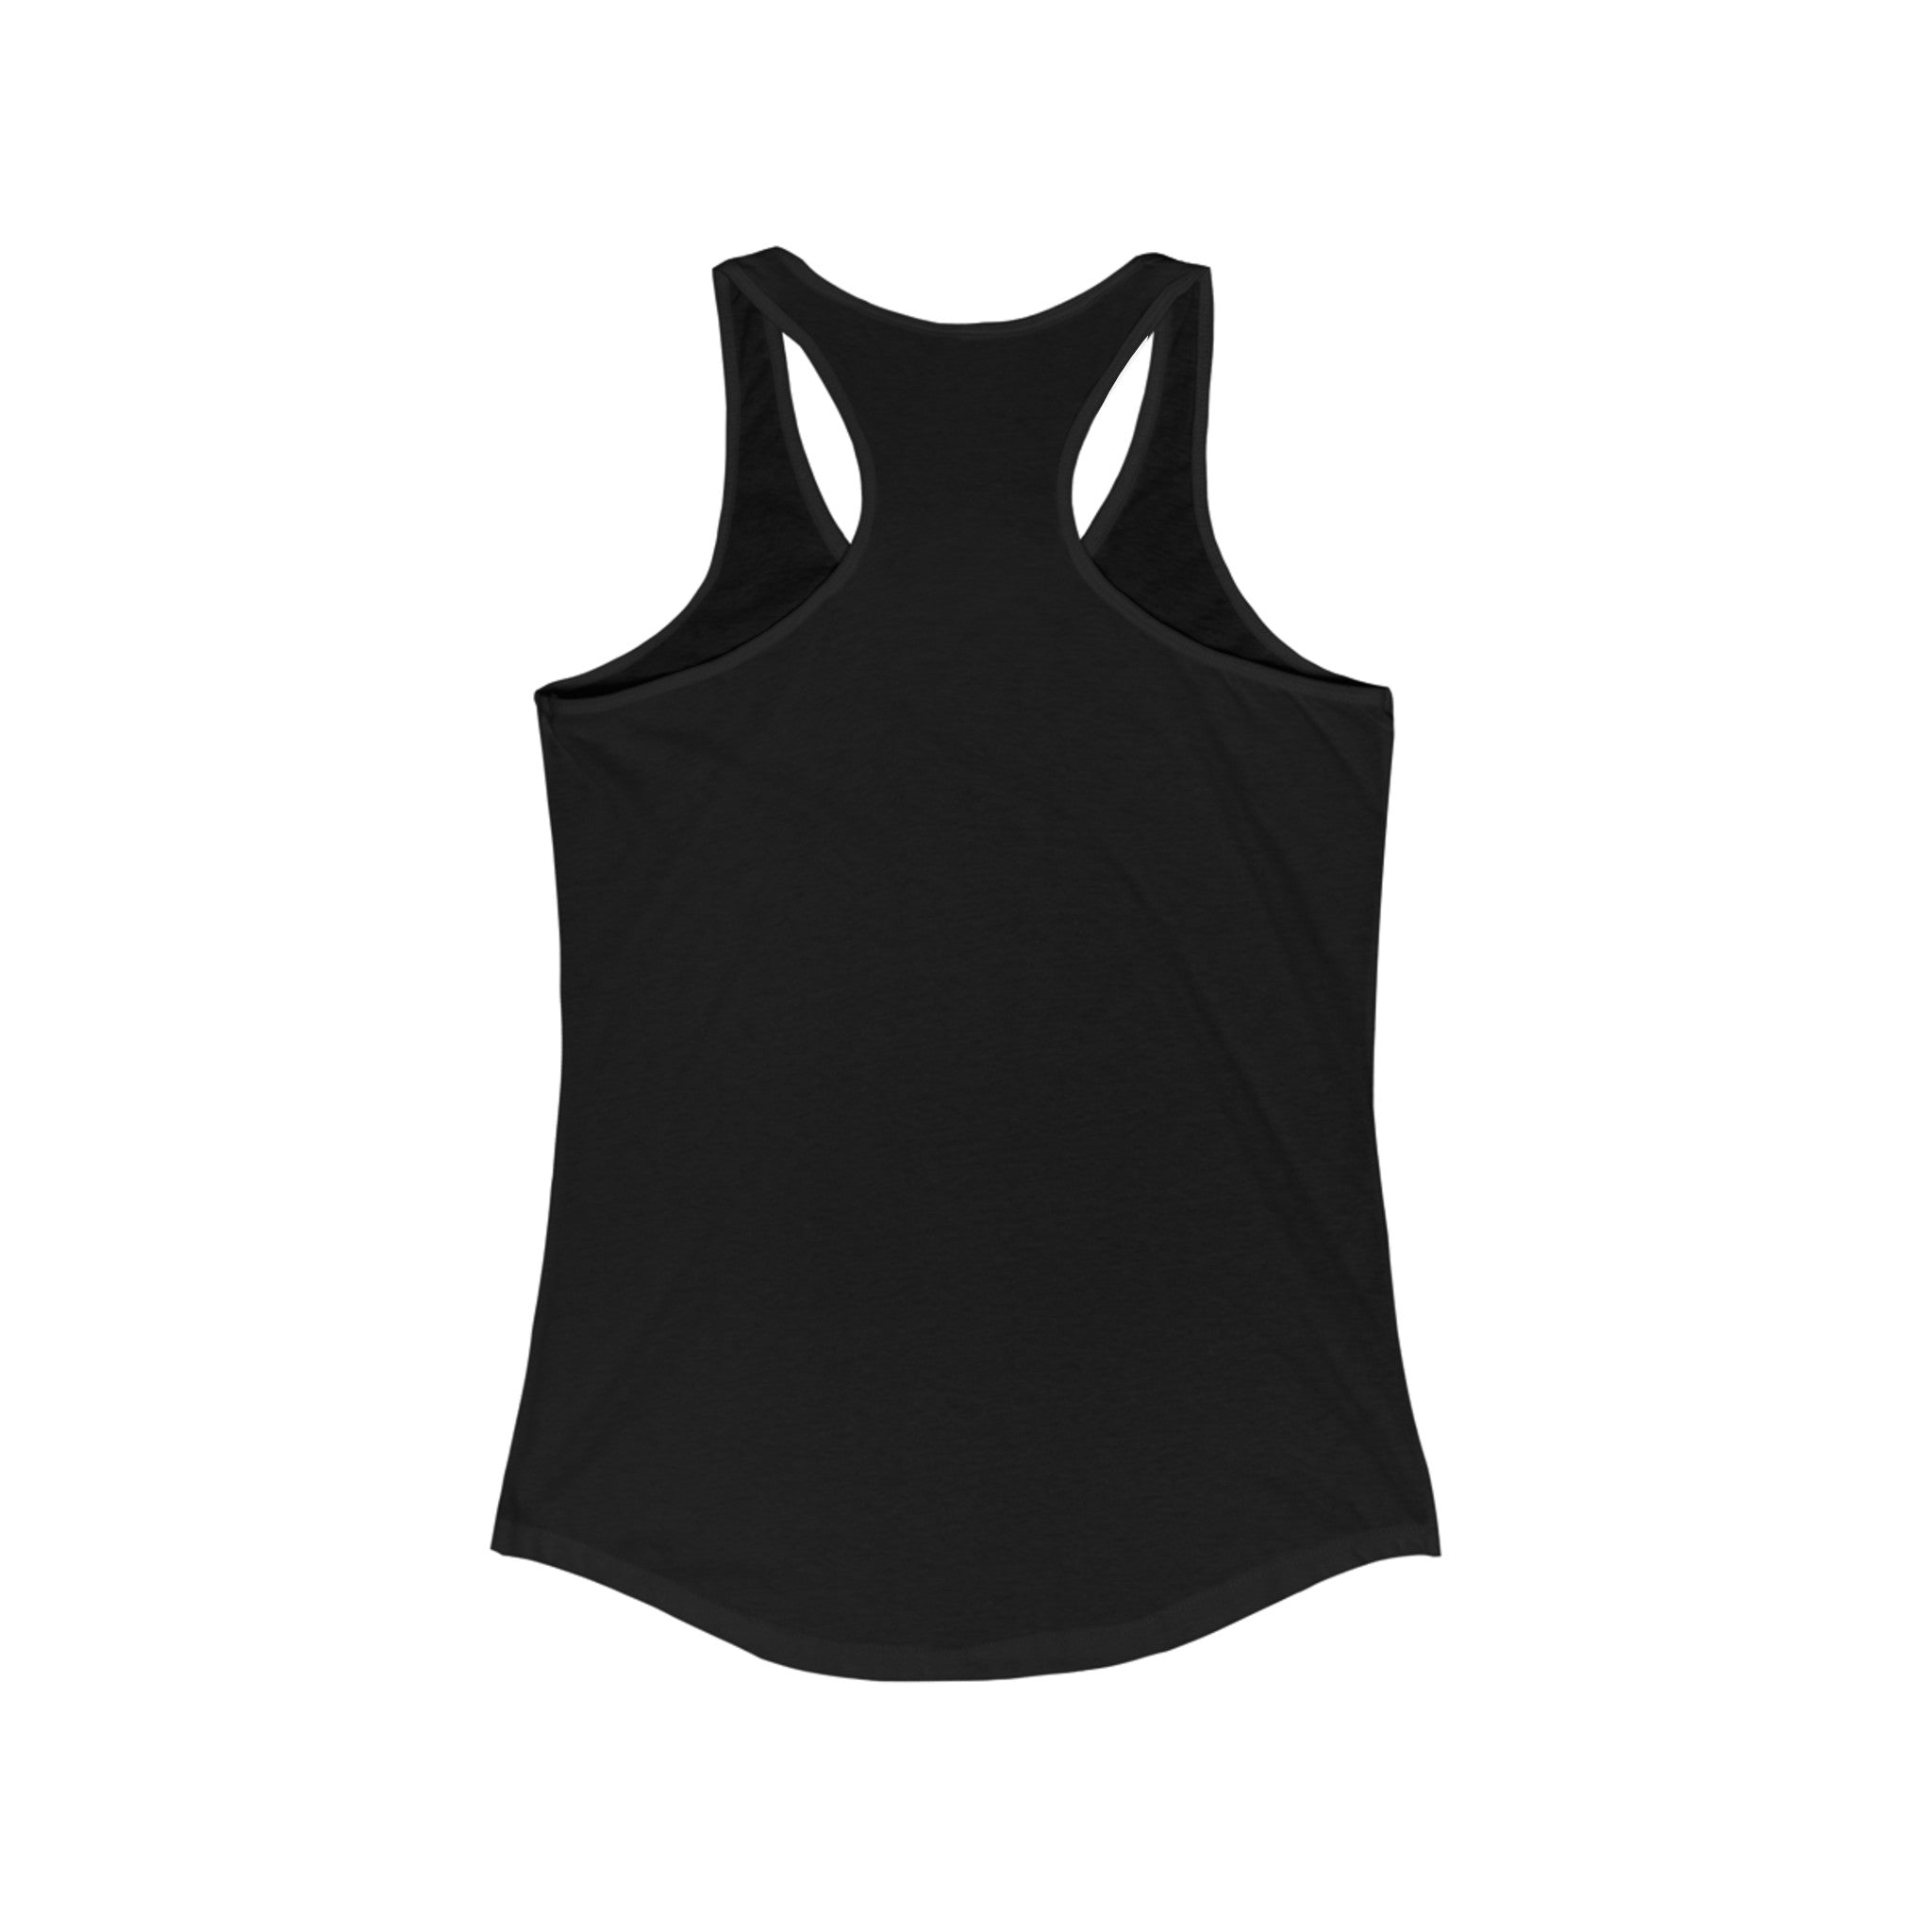 Professional Overthinker - Women's Racerback Tank: Black racerback tank top displayed on a white background, showcasing its lightweight back view and simple, sleeveless design. Perfect for the Professional Overthinker looking for comfort and style.